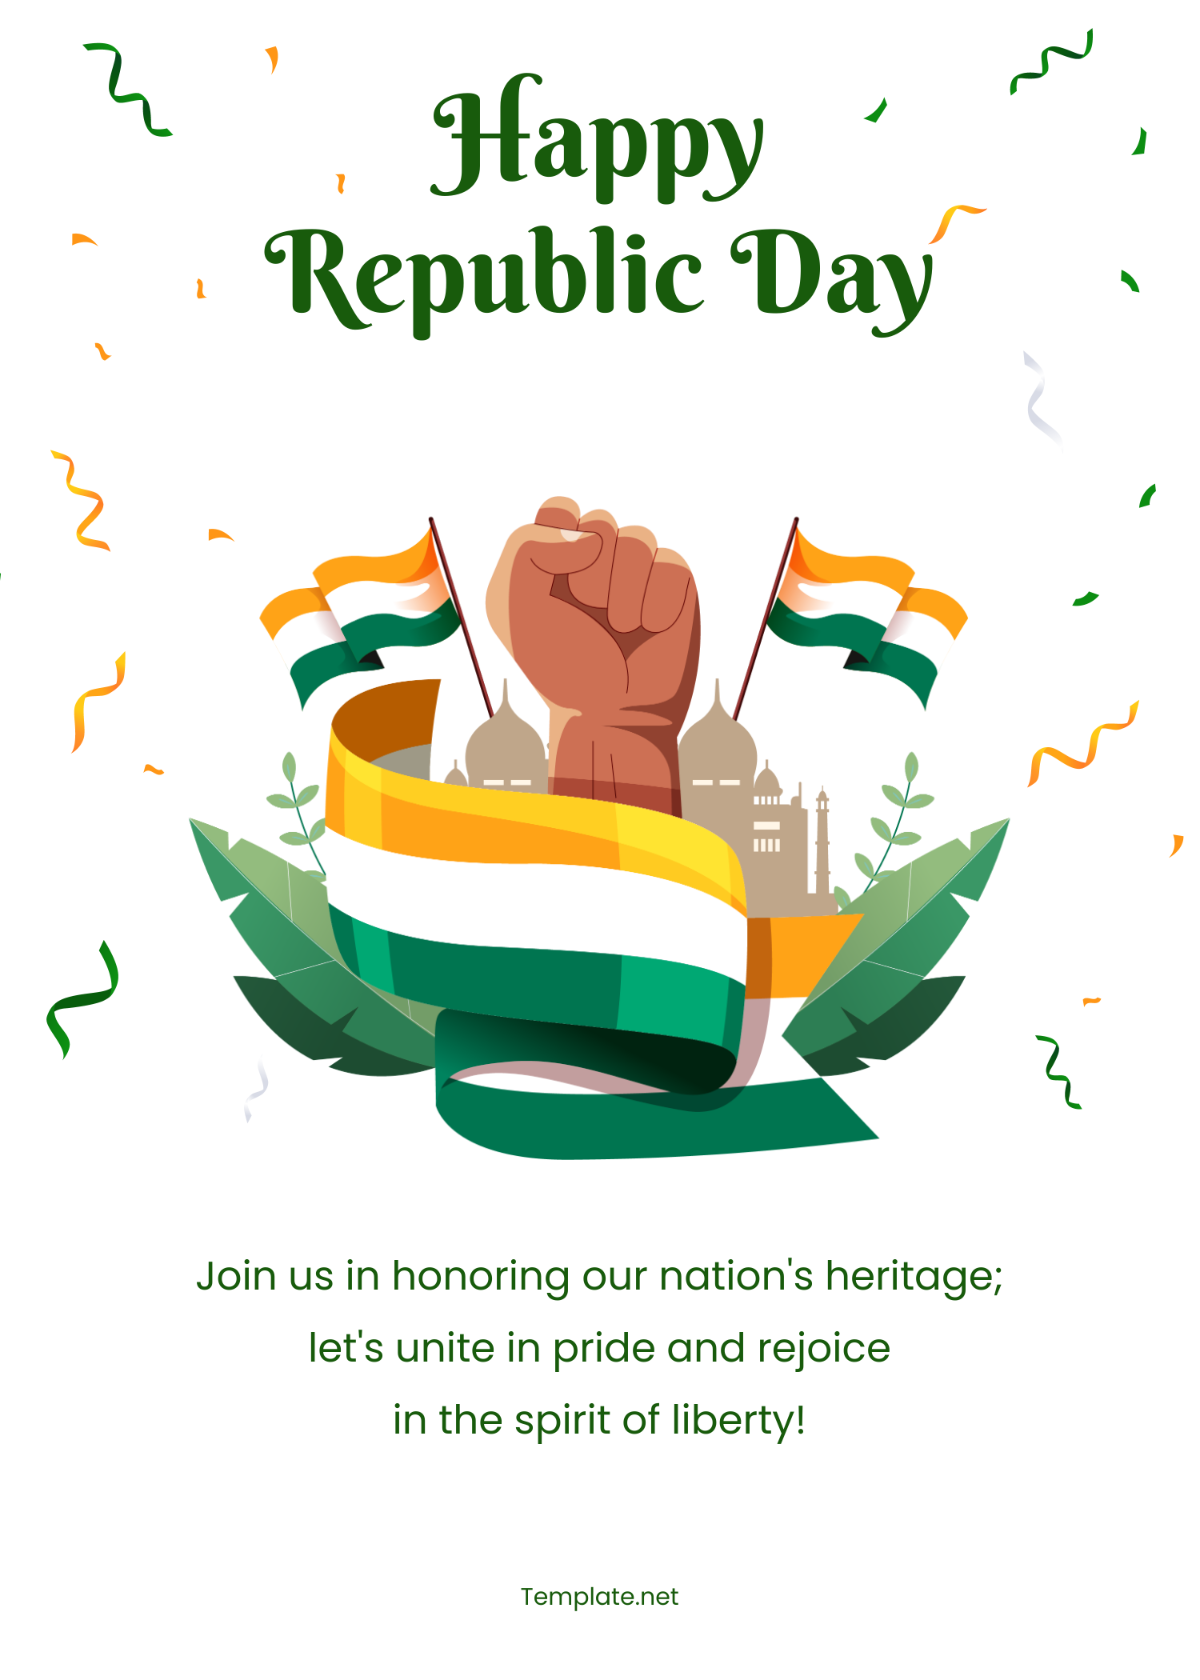 Download Happy Republic Day Round indian flag CDR vector Free dwl |  CorelDraw Design (Download Free CDR, Vector, Stock Images, Tutorials, Tips  & Tricks)